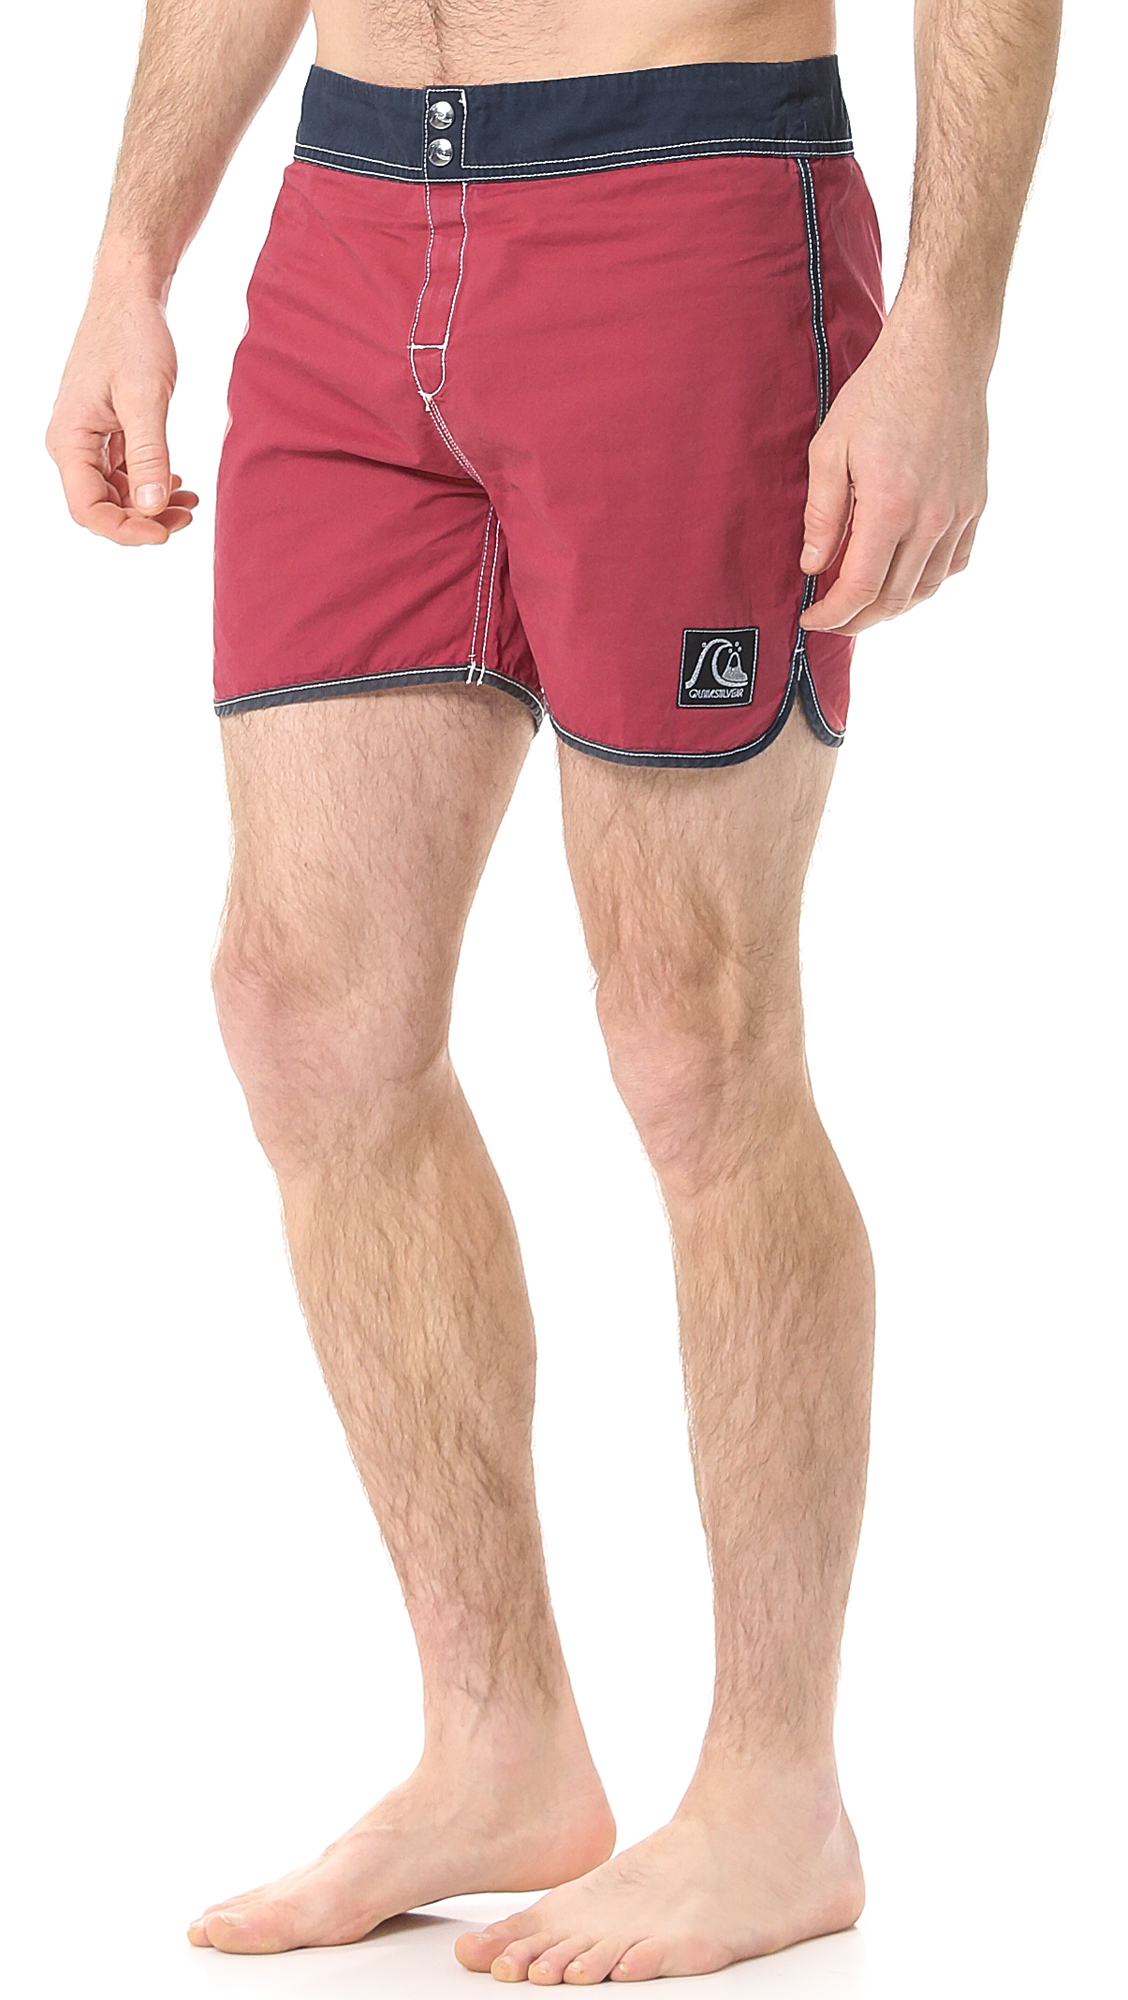 Lyst - Quiksilver Scallop 15 Board Shorts in Red for Men
 Quiksilver Shorts Red